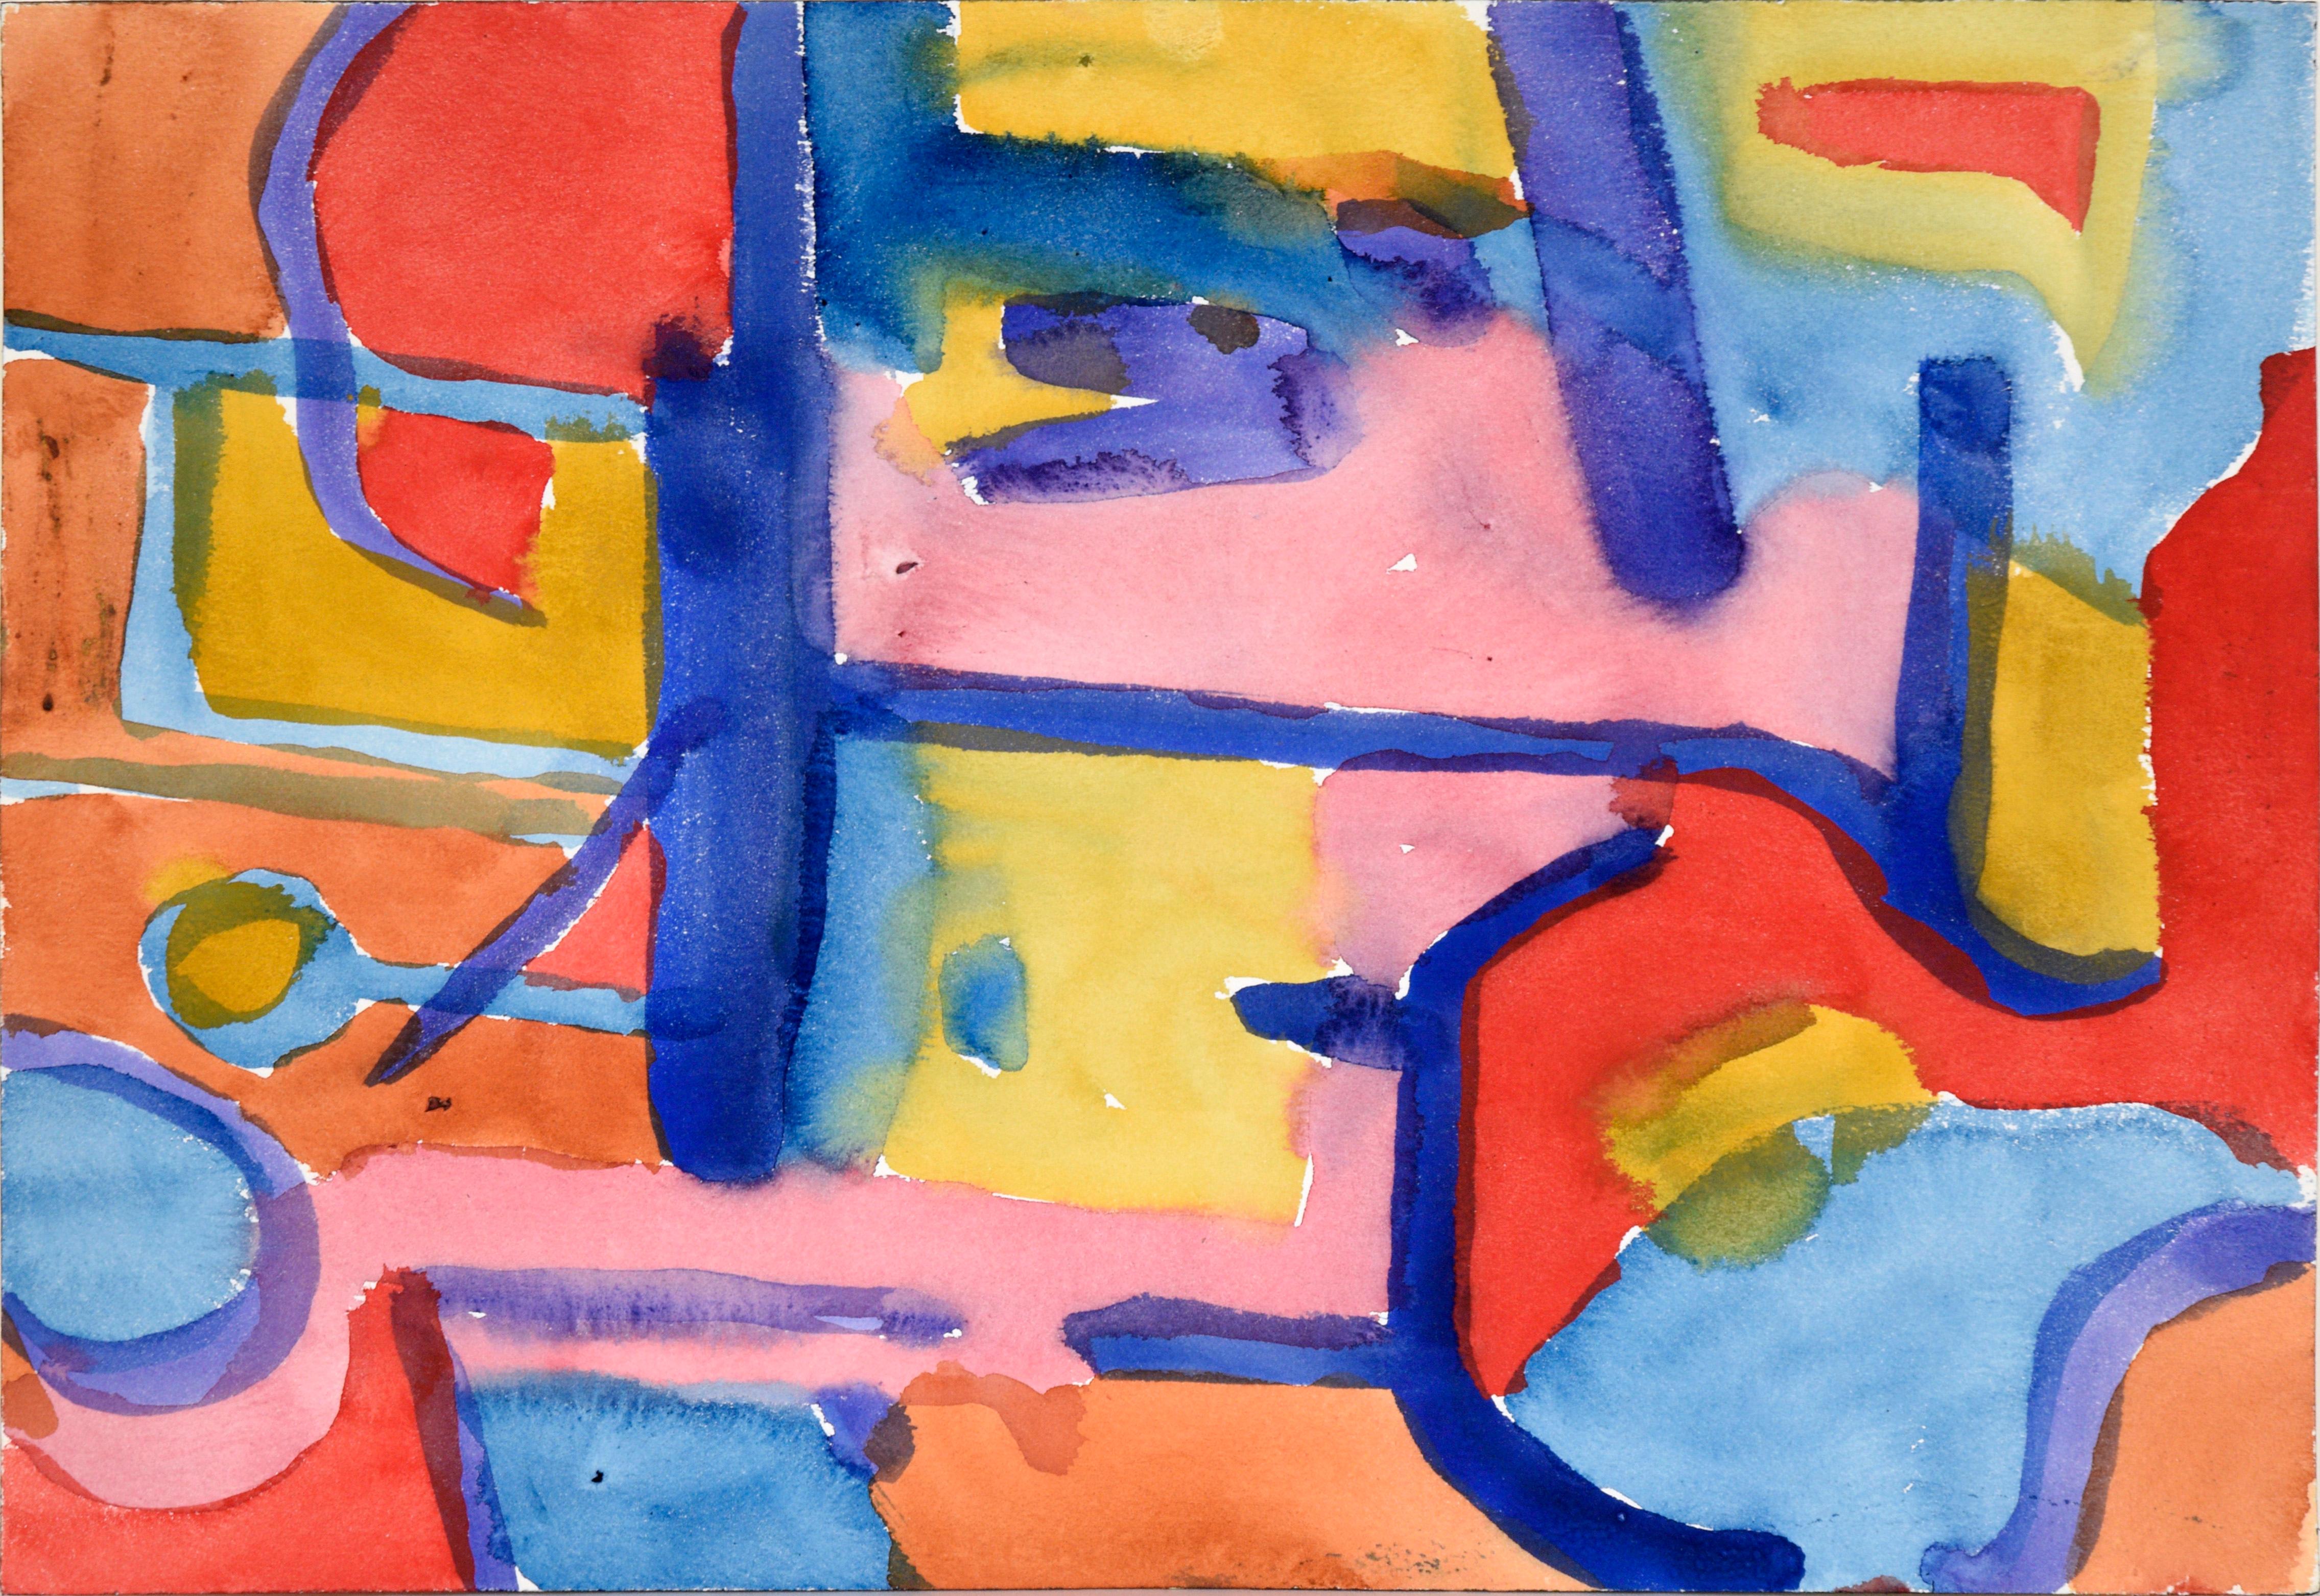 Les Anderson Abstract Drawing - Blue, Pink & Red Abstract in Watercolor on Paper